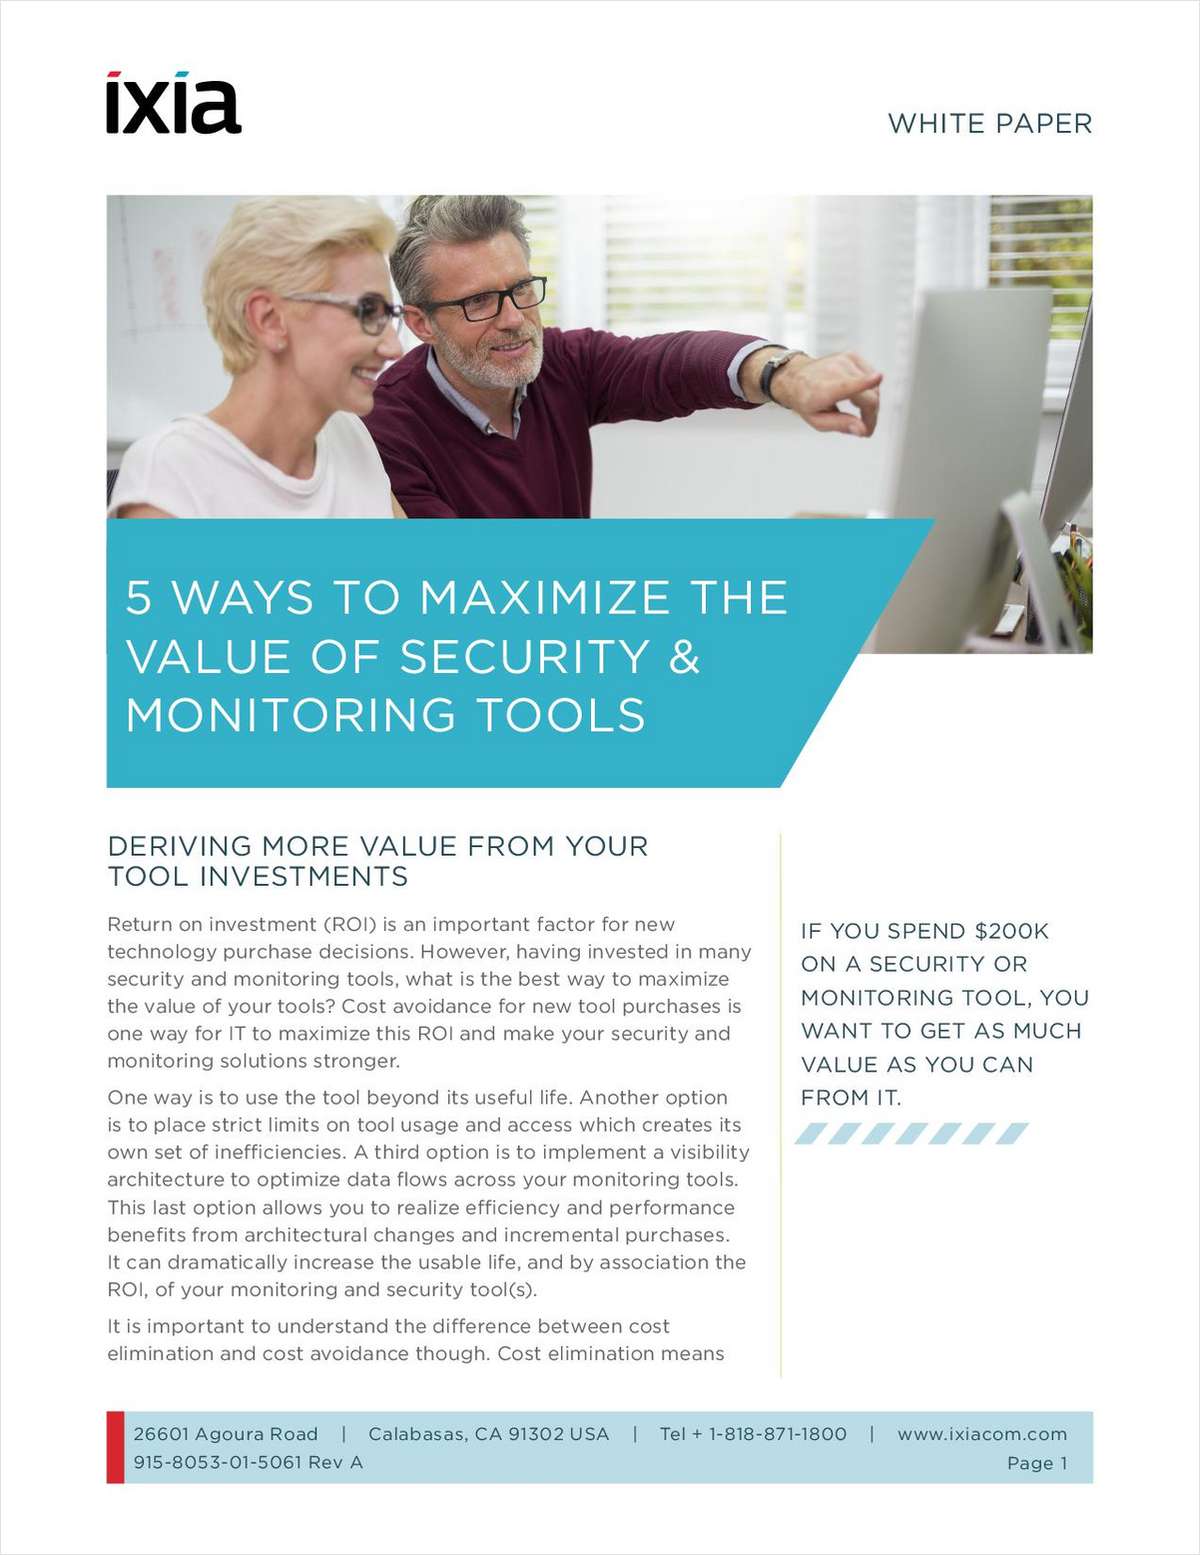 5 Ways to Maximize the Value of Security and Network Monitoring Tools